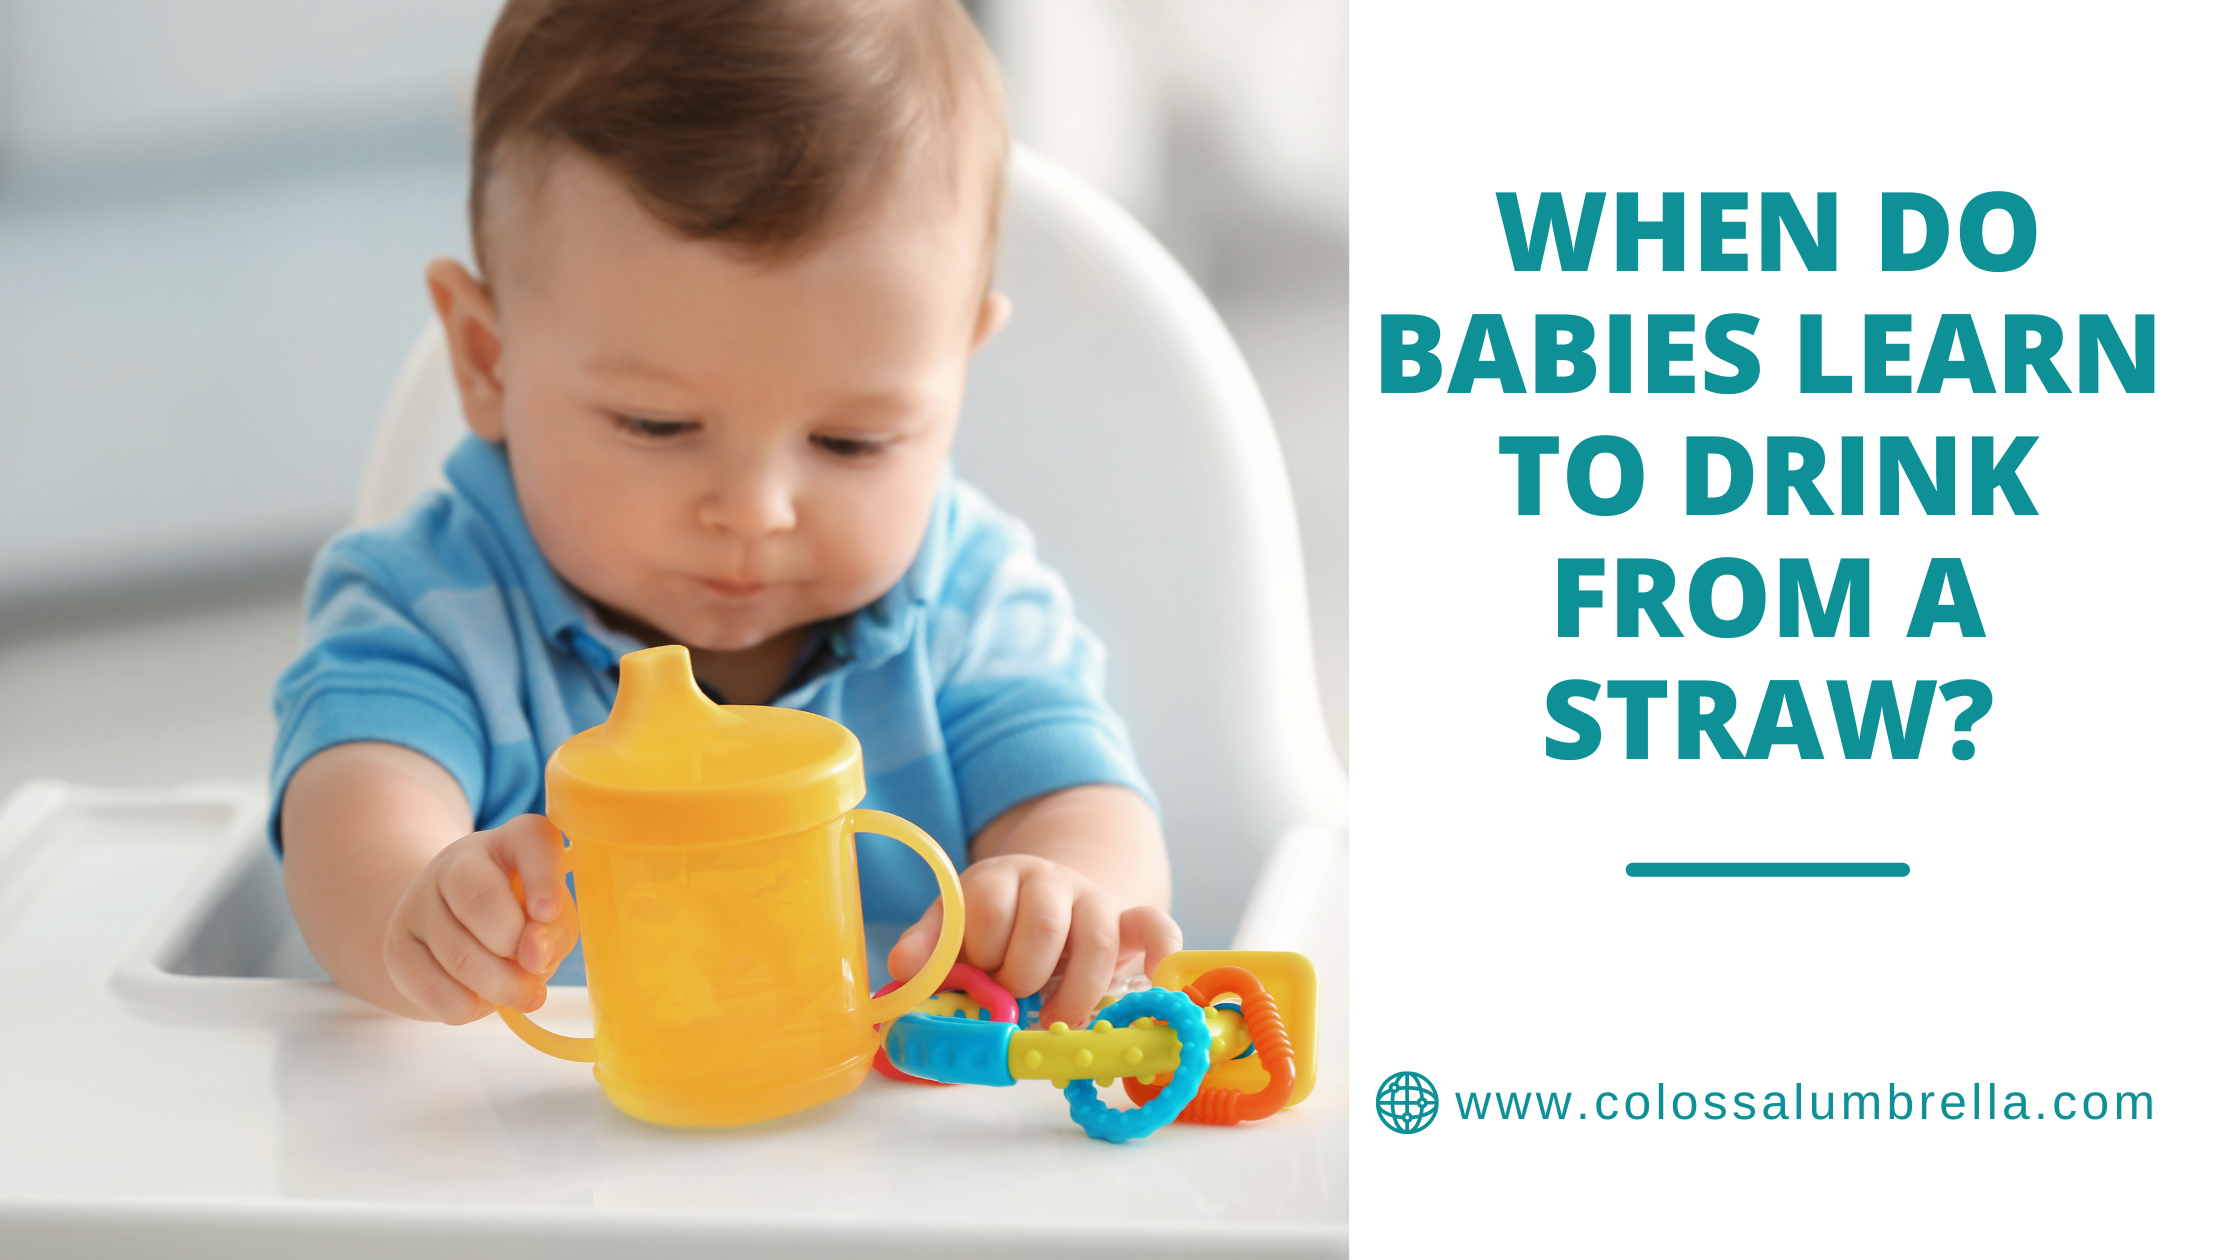 When Do Babies Learn to Drink From a Straw